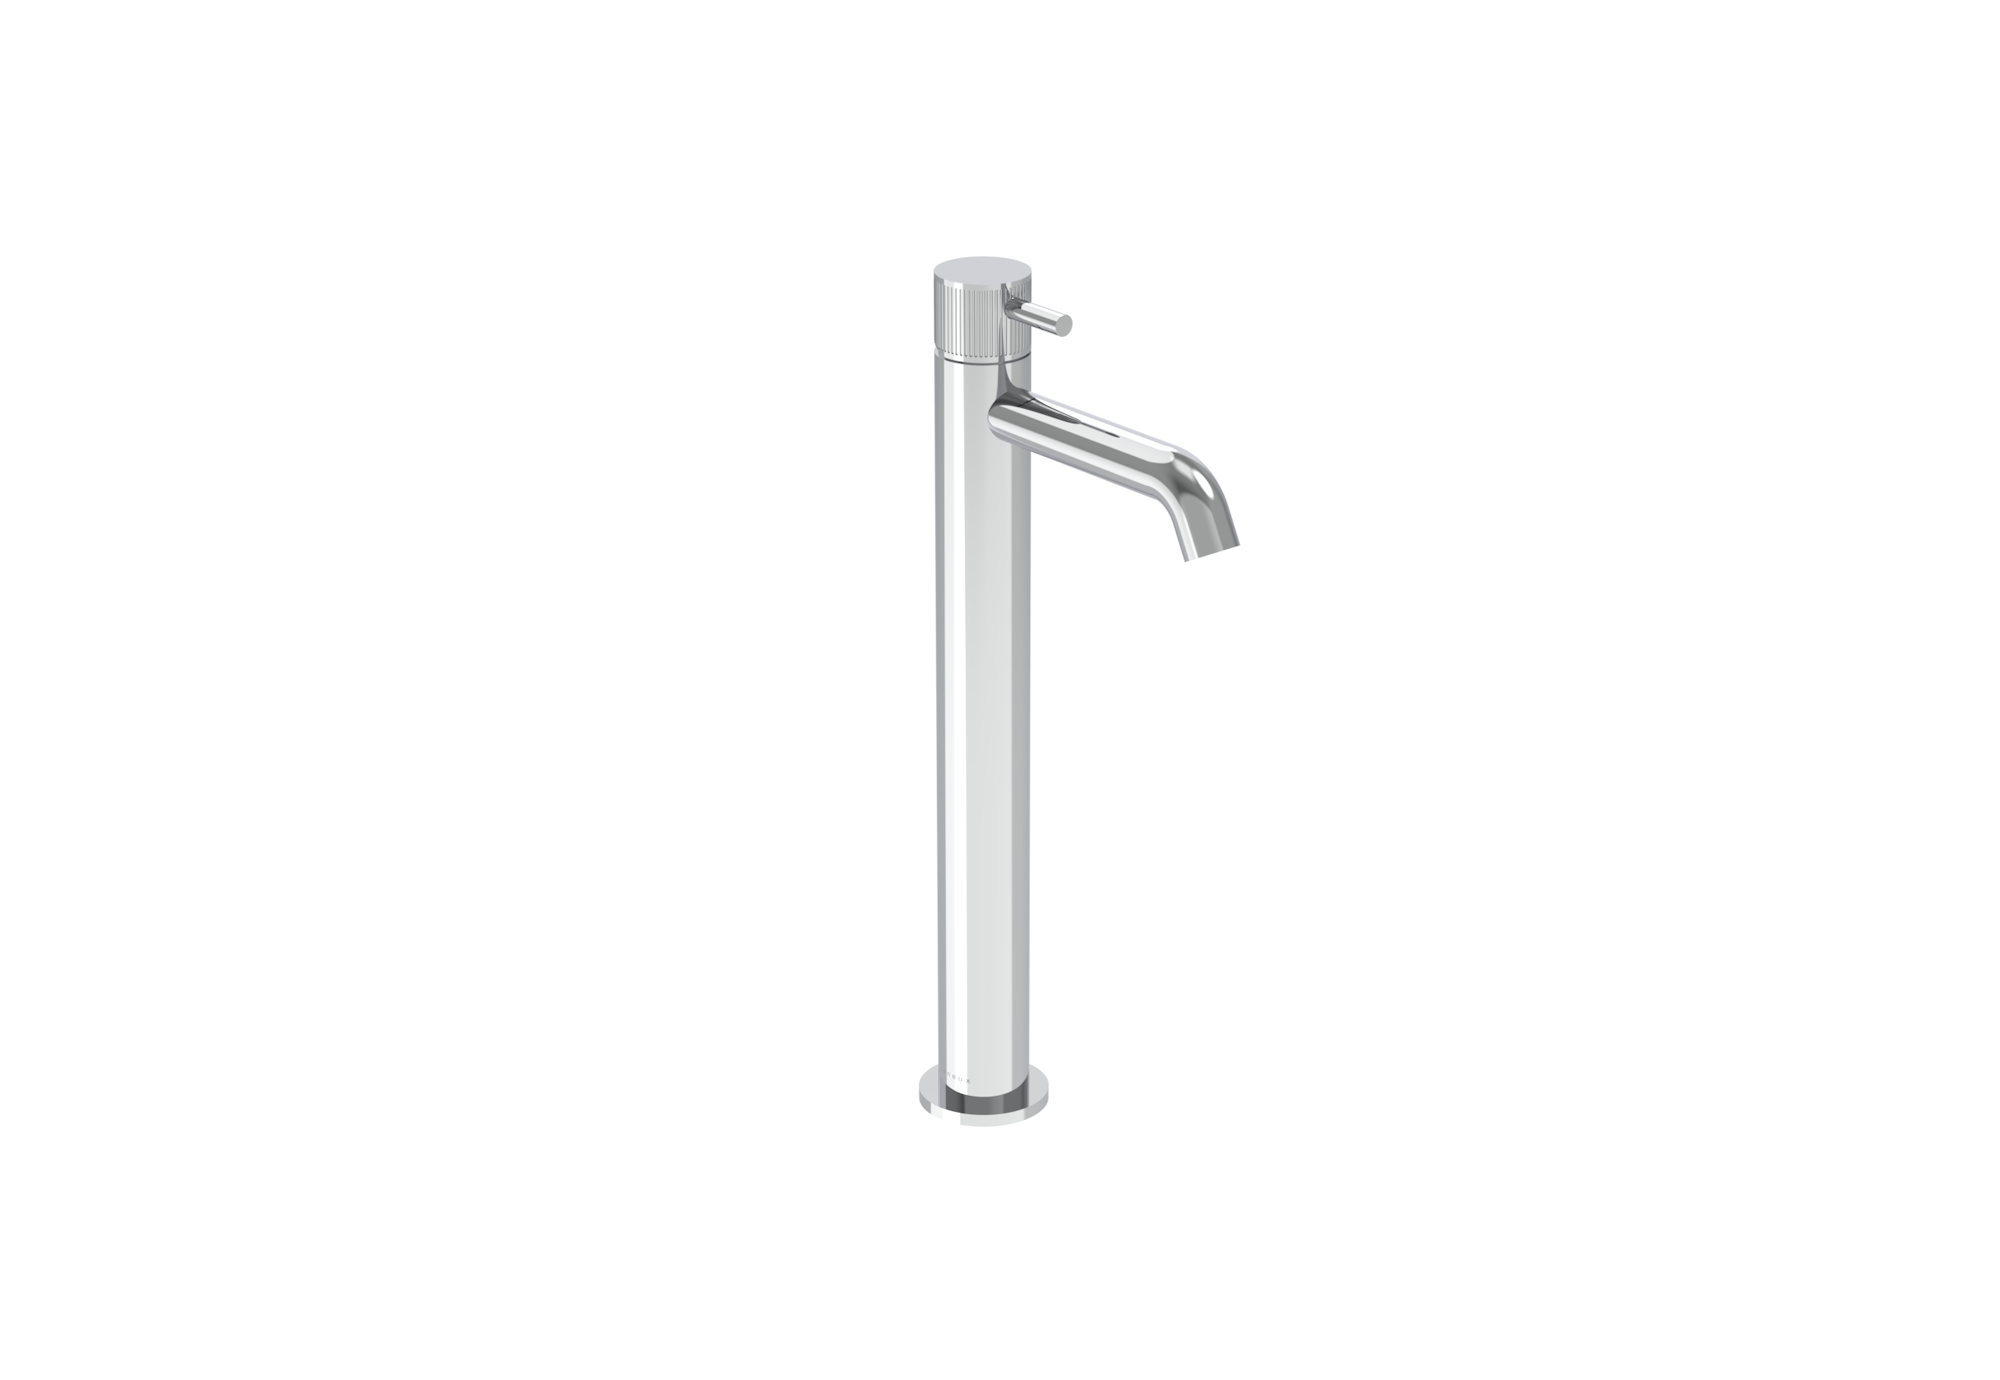 COS Tall Basin mixer KIT - w/ Fluted handle - Chrome